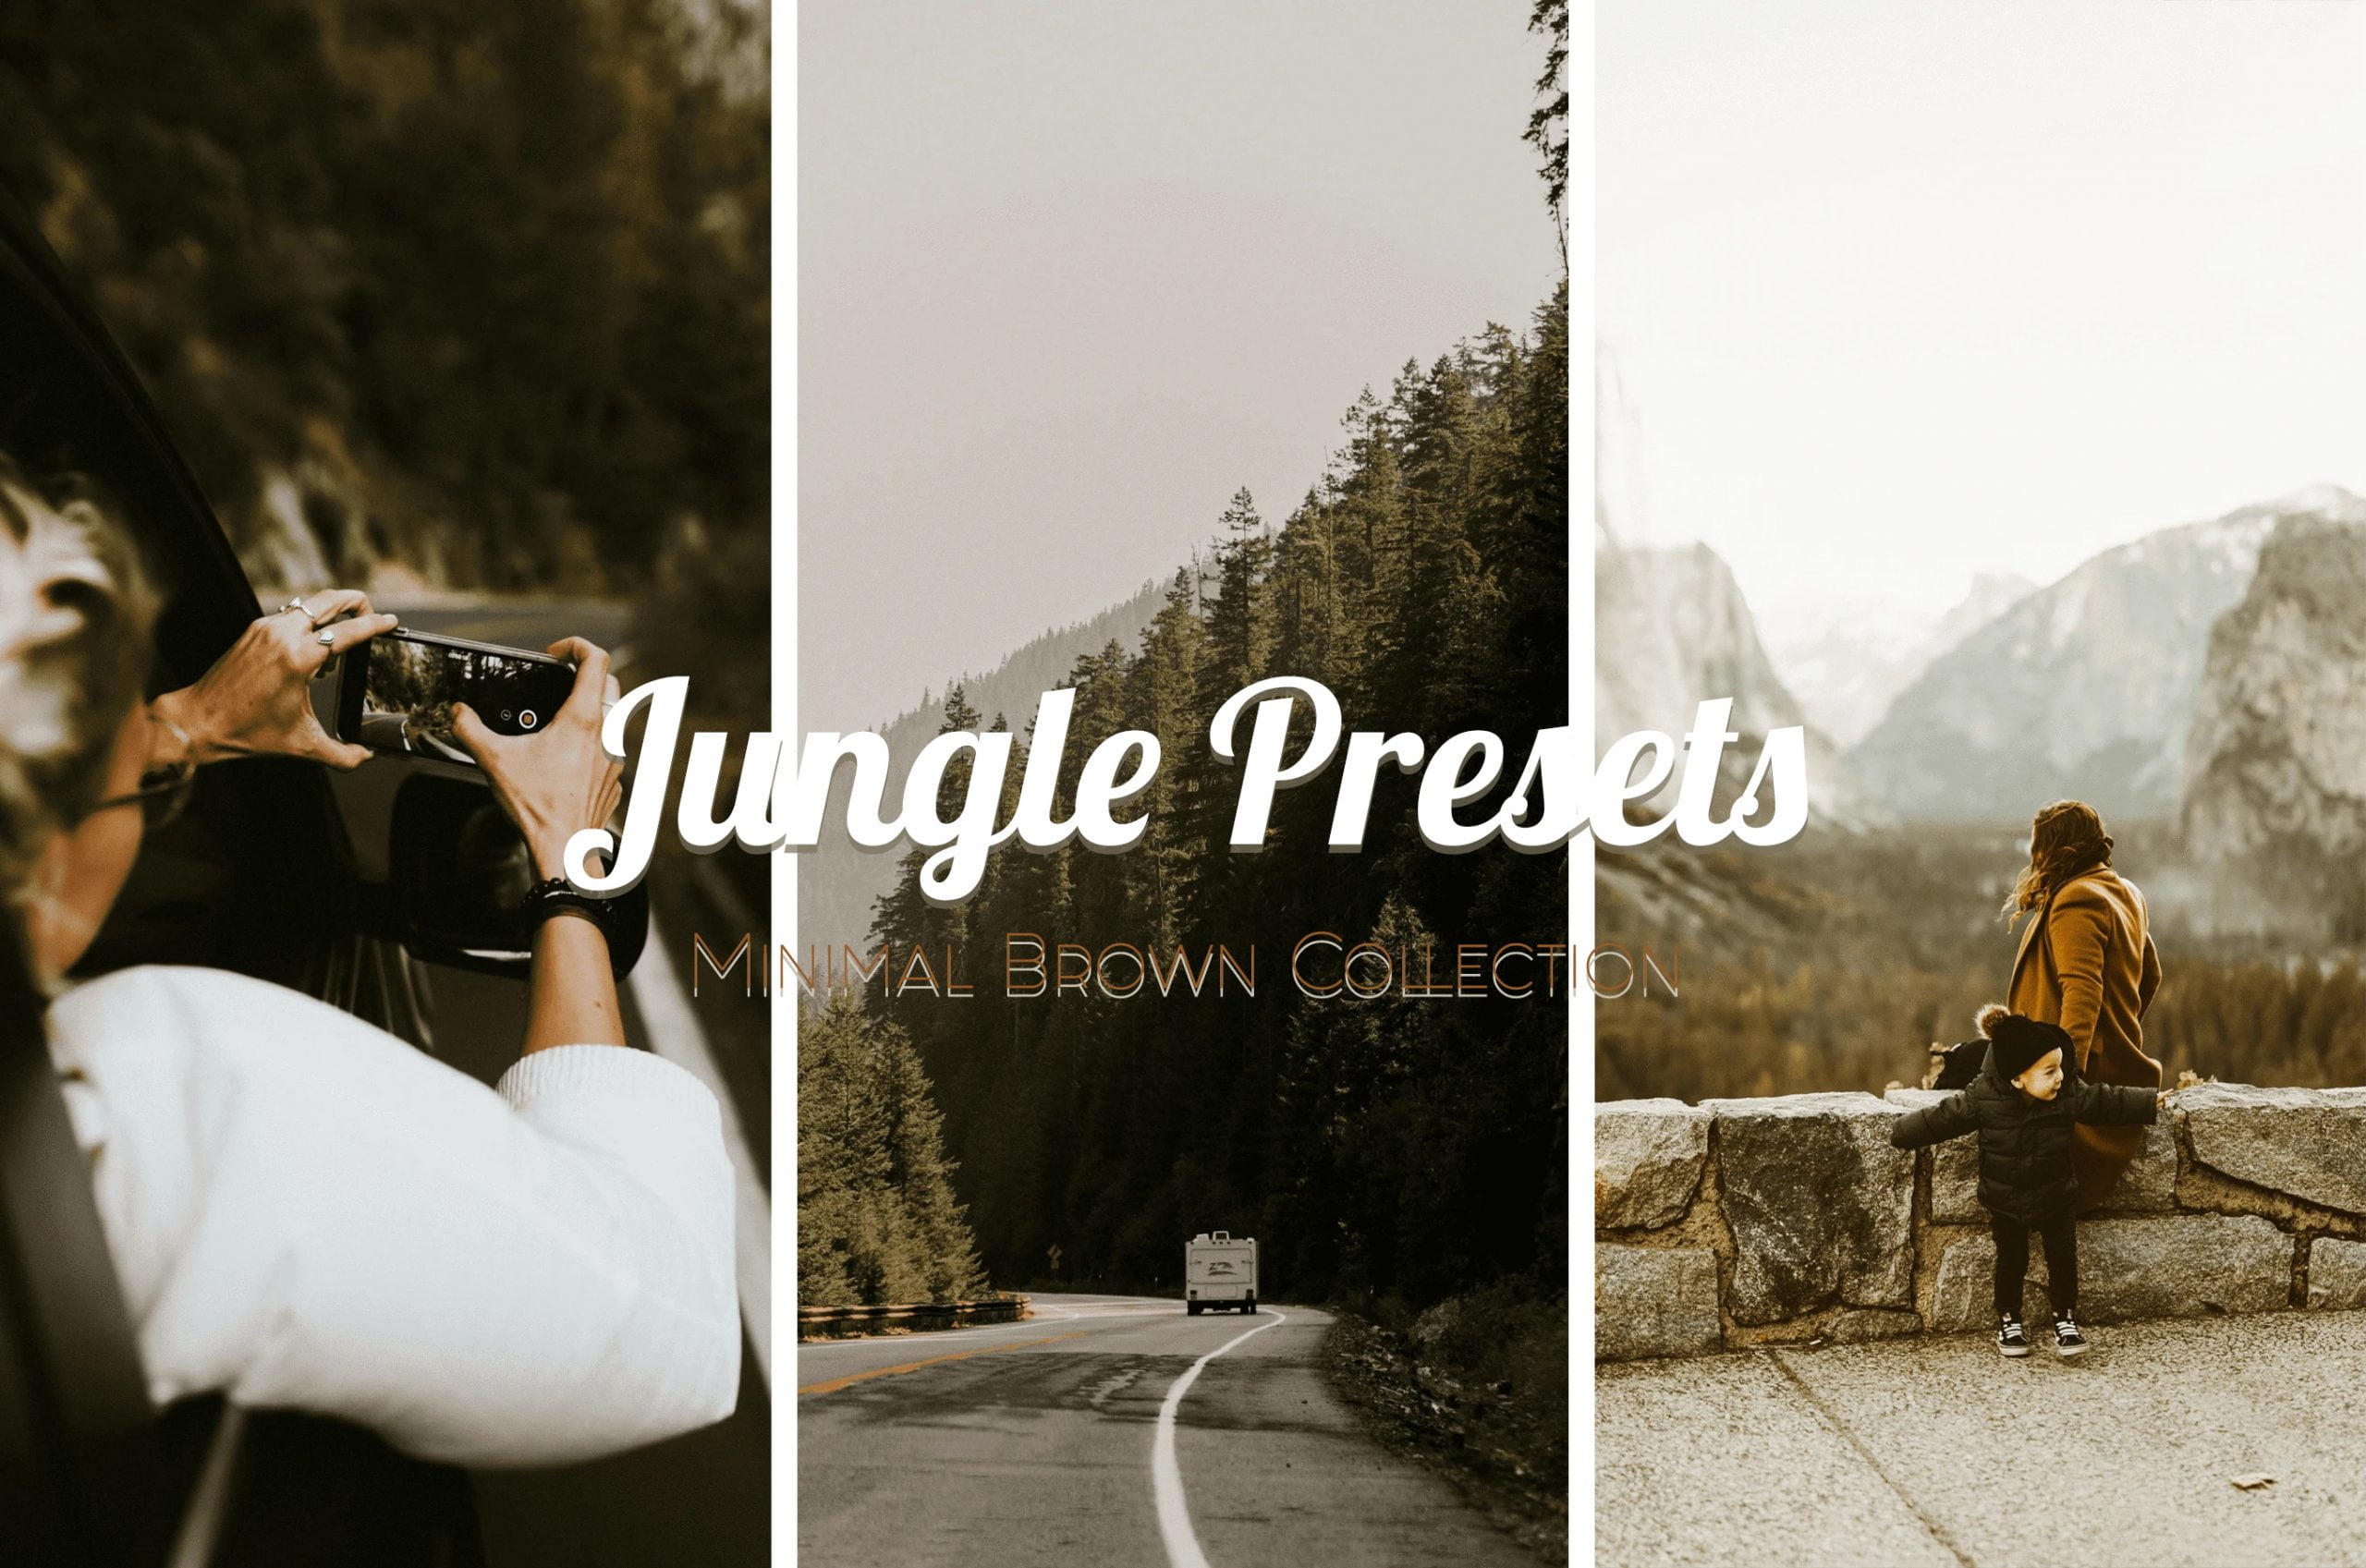 Jungle Presets Minimal Brown Collection